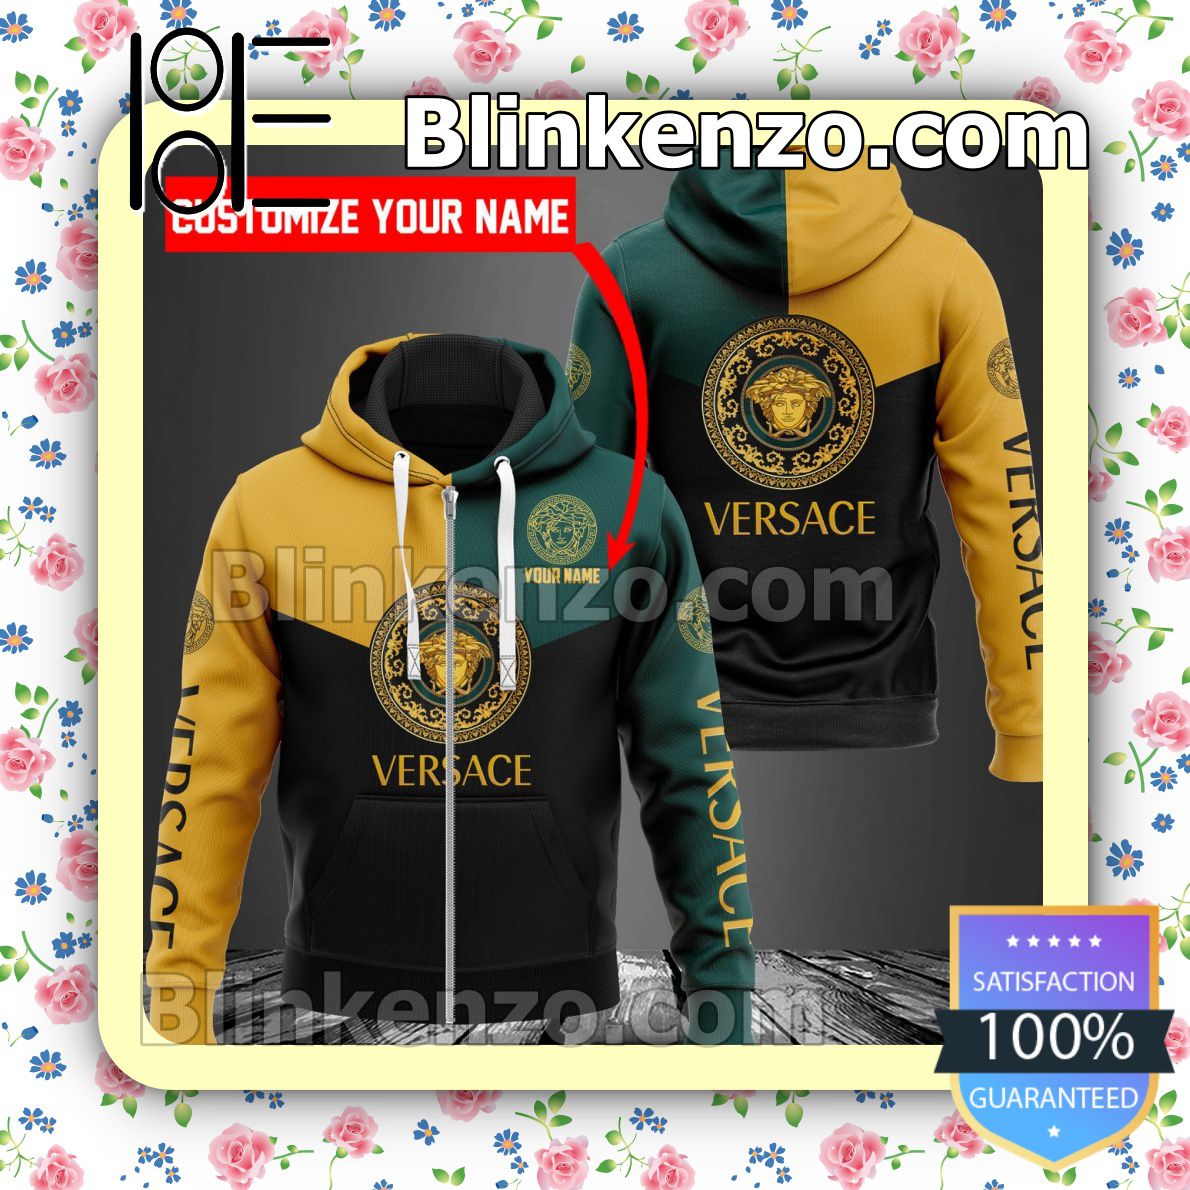 Very Good Quality Personalized Versace Mix Color Green Yellow And Black Full-Zip Hooded Fleece Sweatshirt